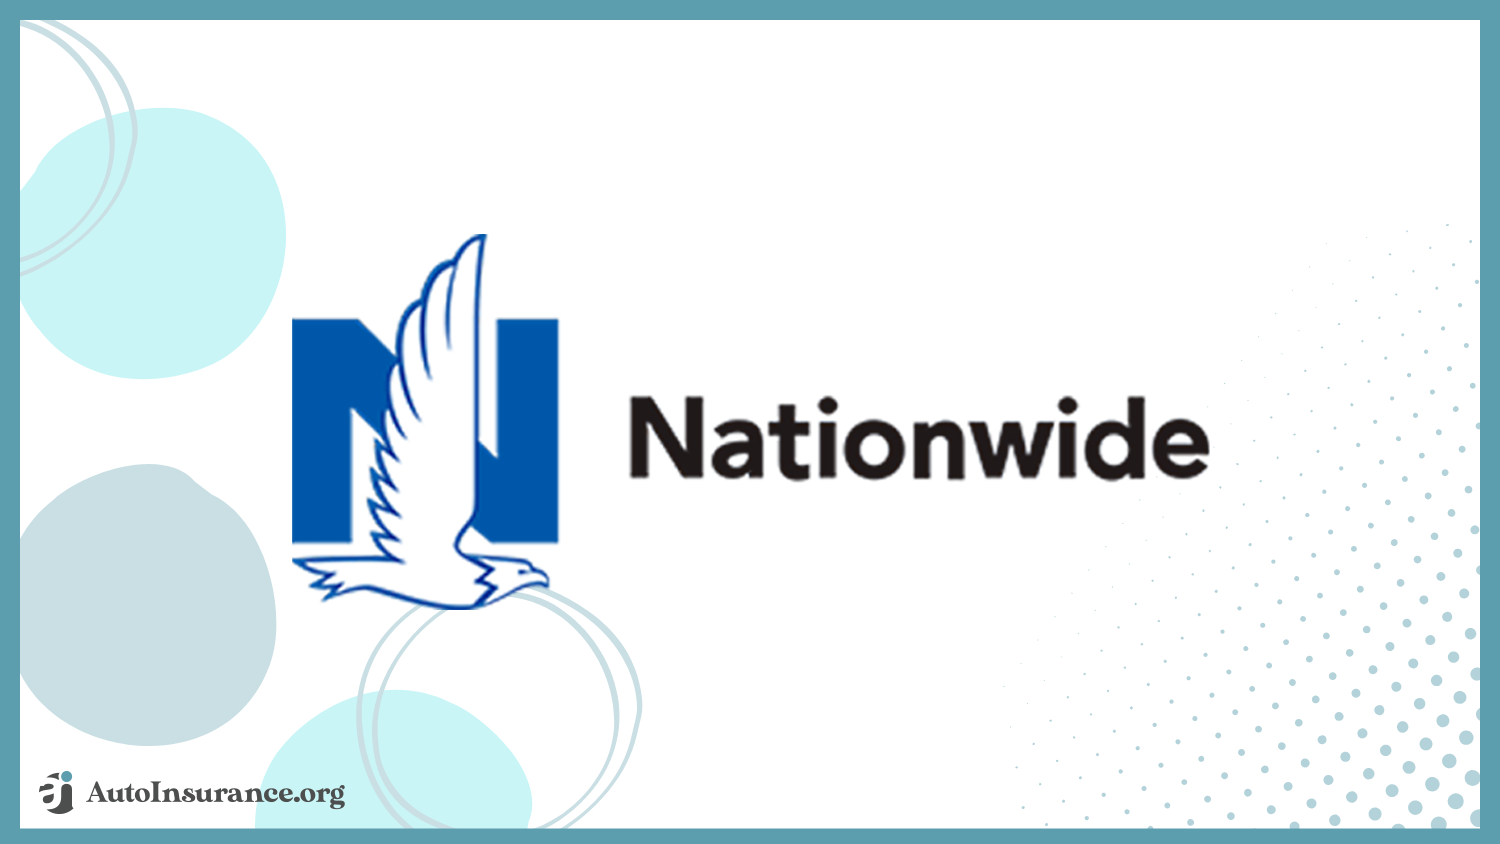 Nationwide: Best Auto Insurance for Disabled Veterans